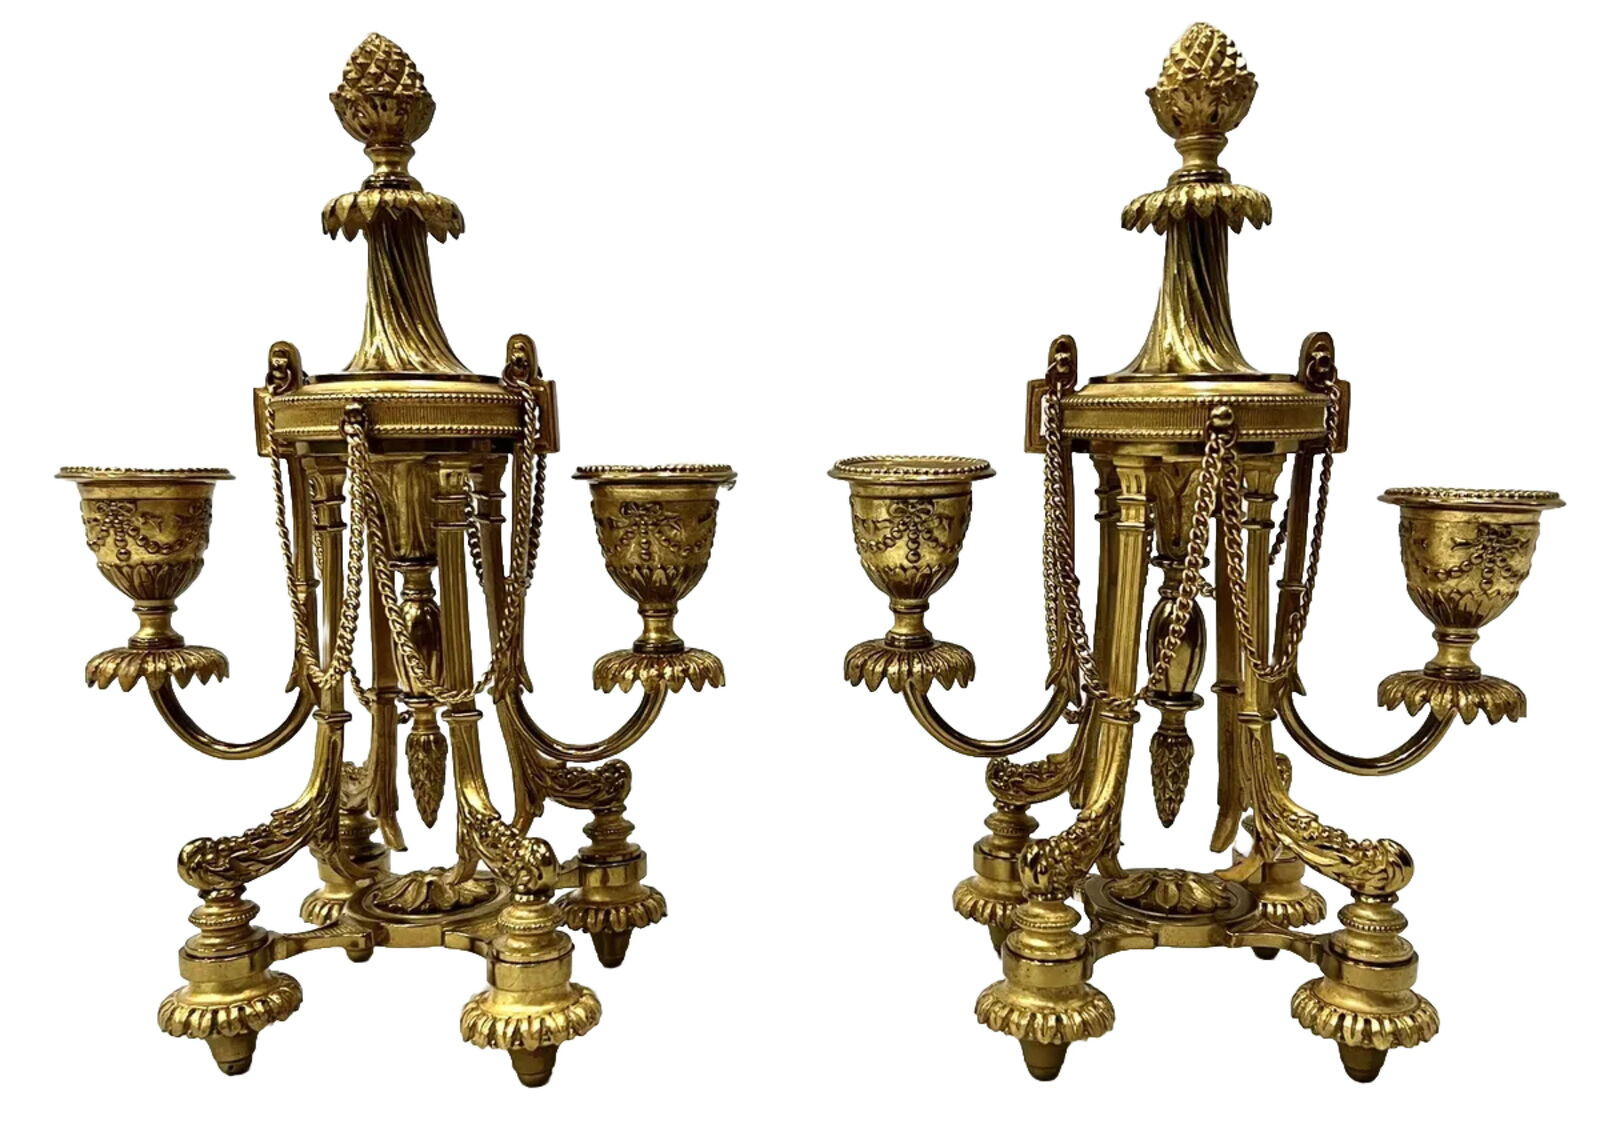 Pair of  18th Century French Gilded Bronze  Double-Light Candelabras